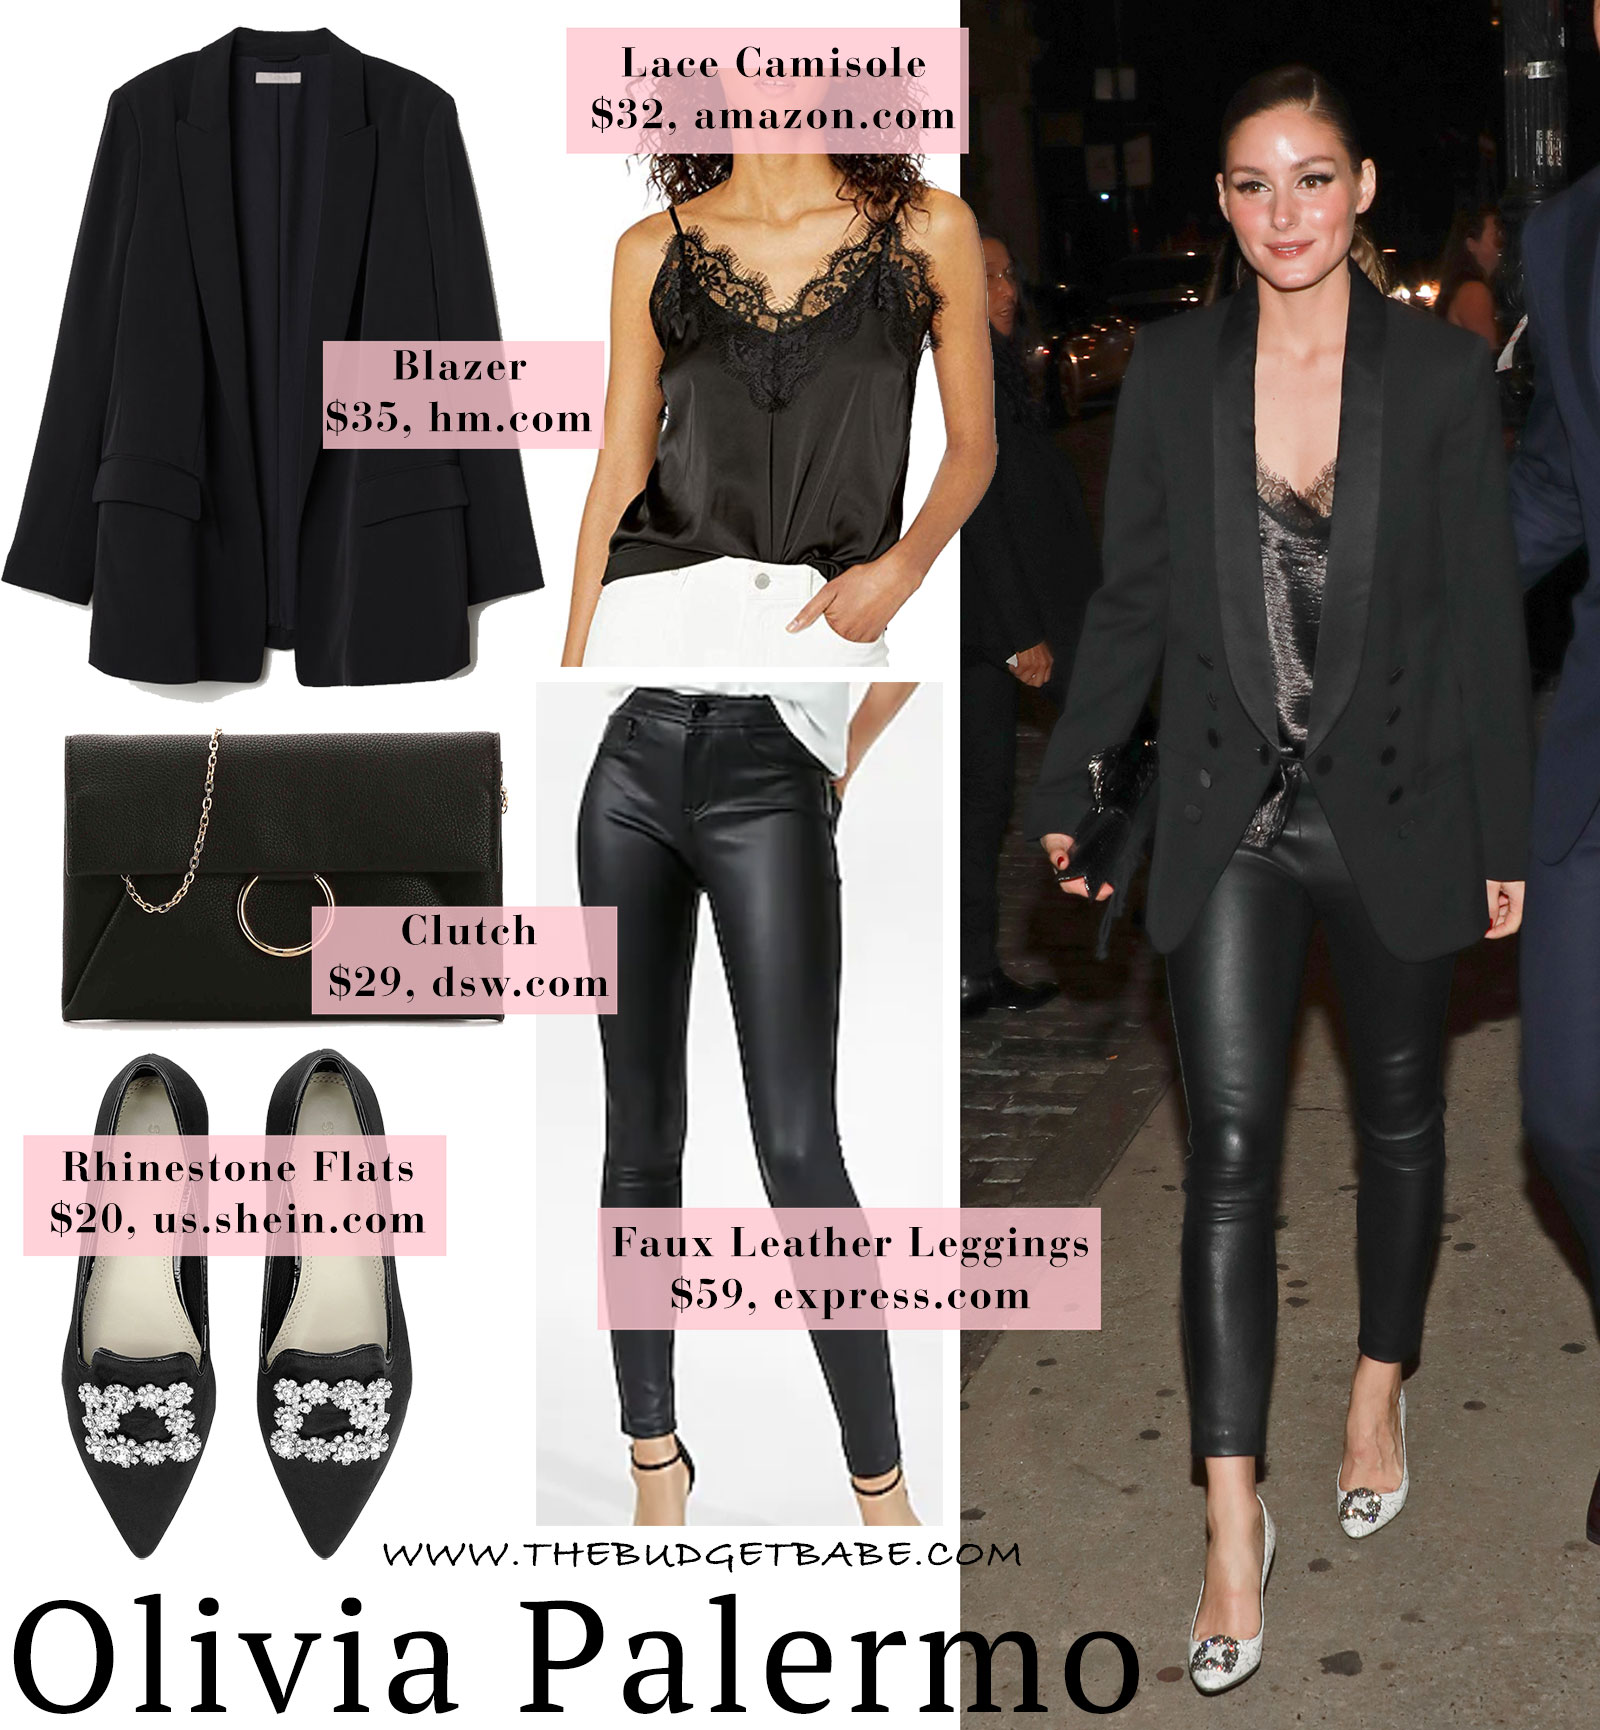 Olivia Palermo going-out outfit idea